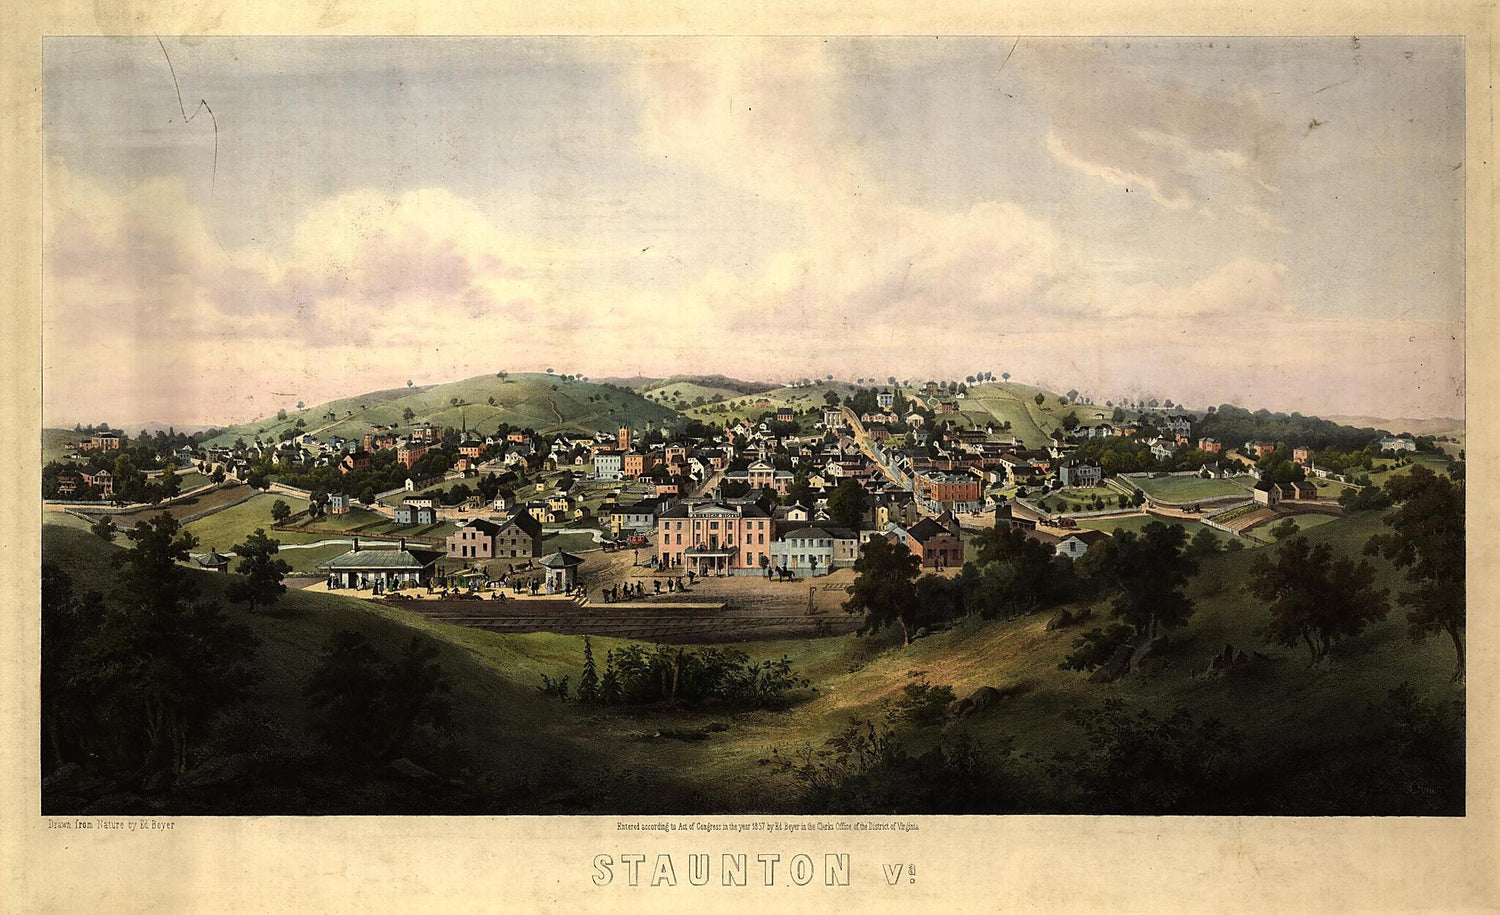 This old map of Staunton, Virginia / Drawn from Nature by Ed. Beyer ; W. Rau from 1857 was created by Edward Beyer, Woldemar Rau in 1857